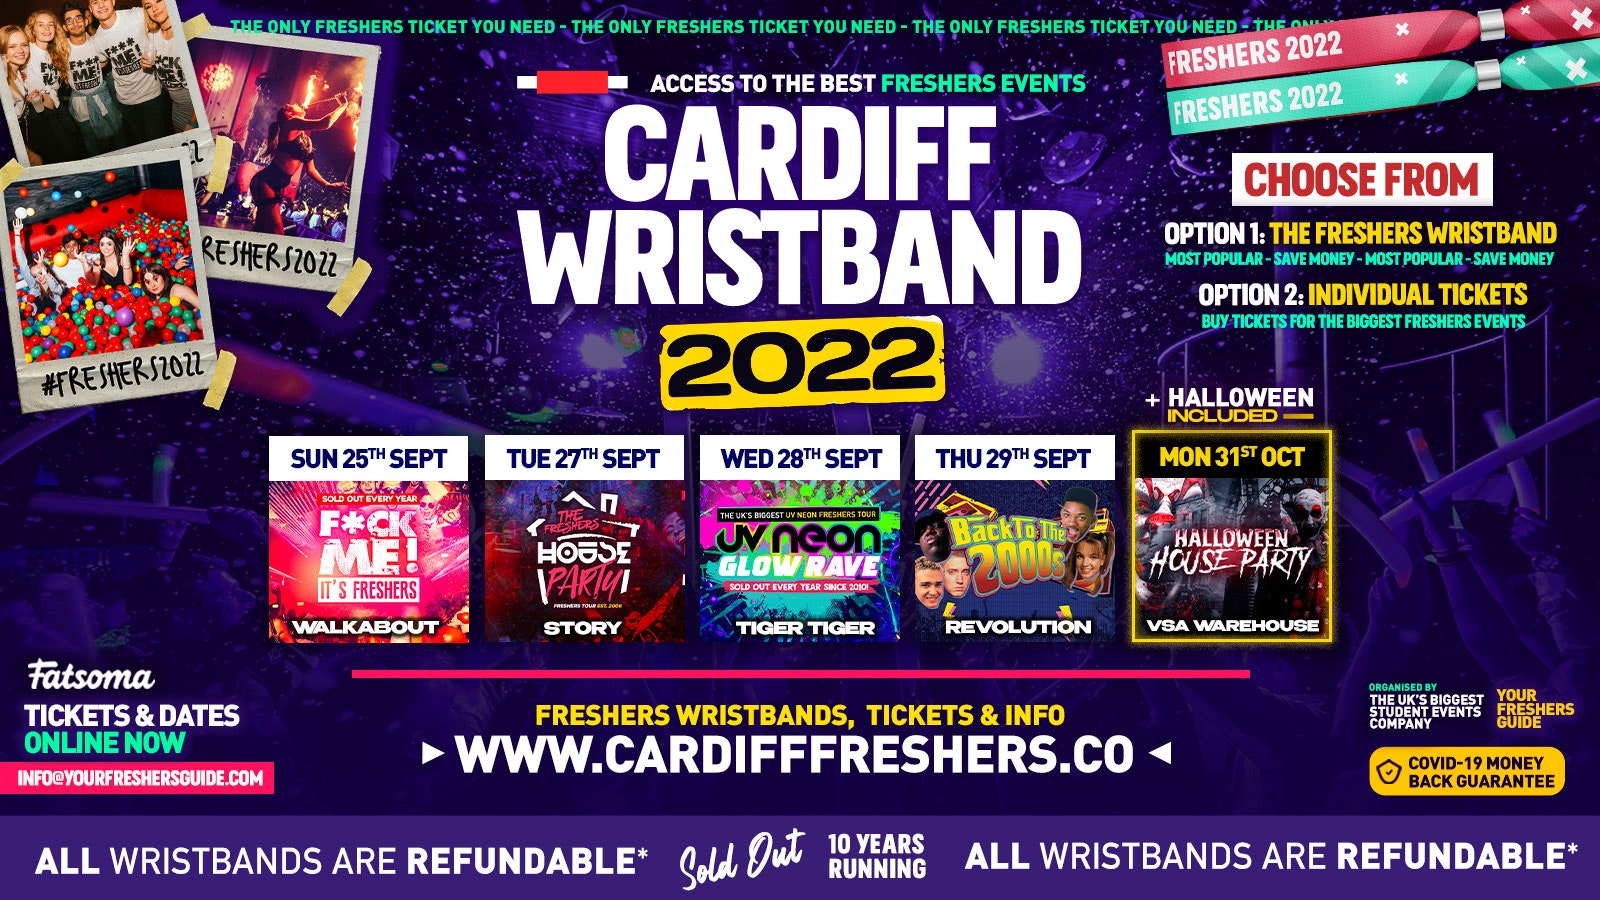 Cardiff Freshers Wristband 2022 – The BIGGEST Events in Cardiff’s BEST Clubs | Cardiff Freshers 2022 – ⚠️ OVER 95% SOLD OUT ⚠️